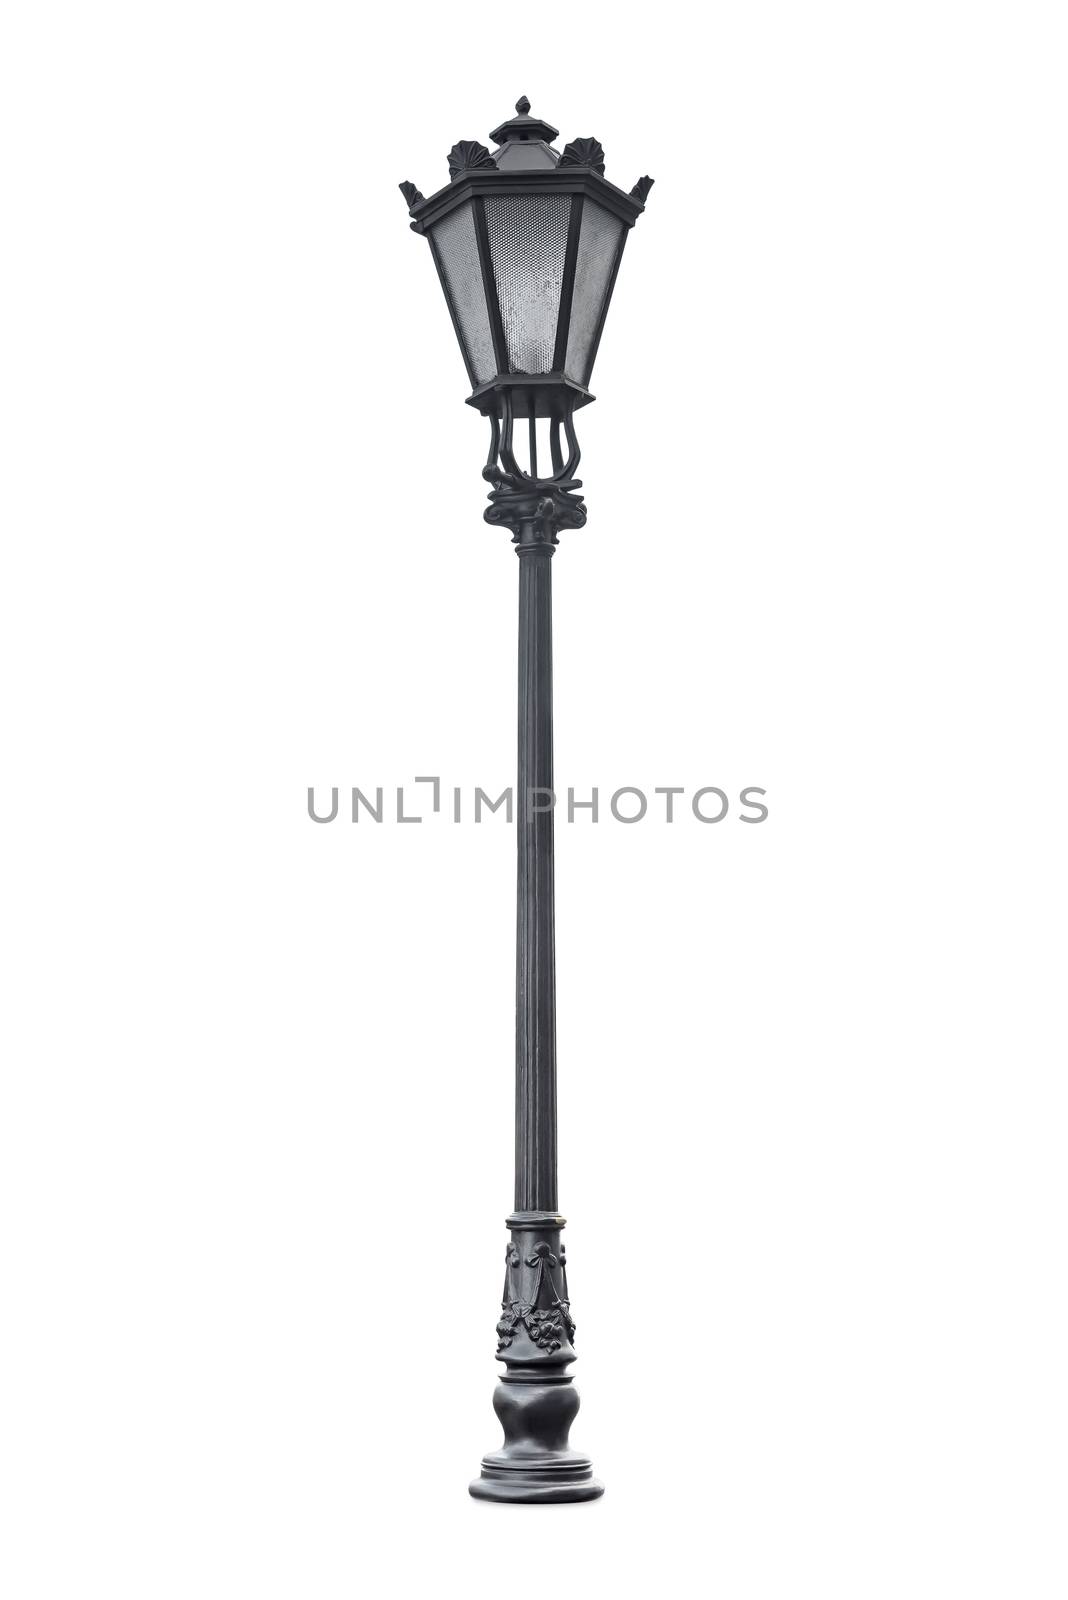 Decorative street lantern isolated on white background with clipping path